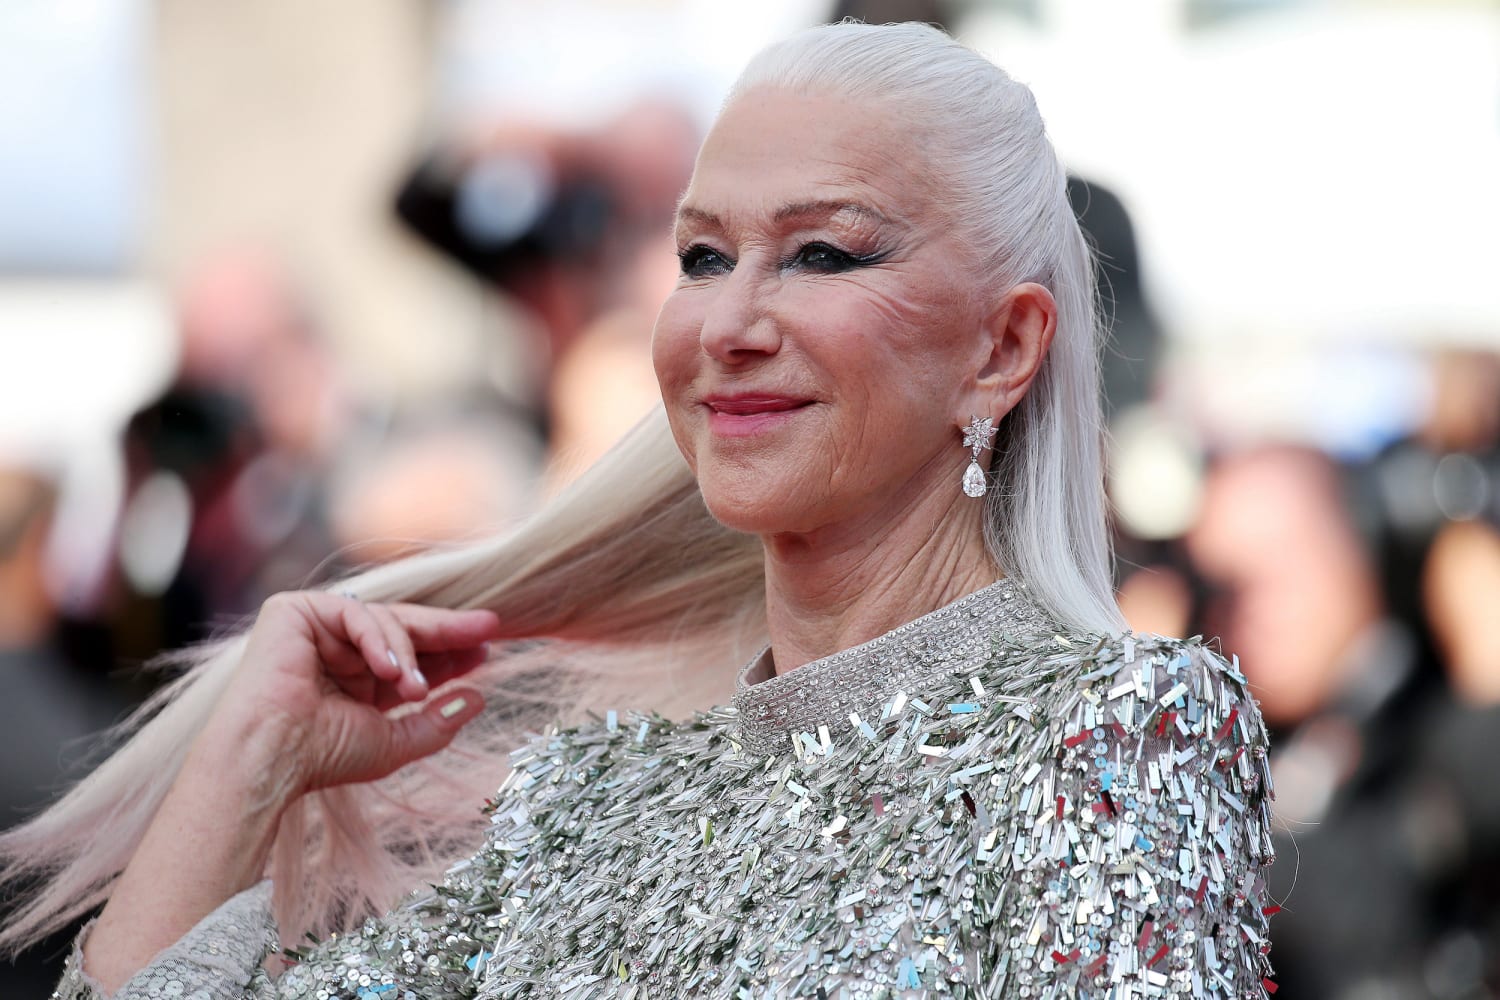 Helen Mirren Wears Extra-Long Hair Extensions at Cannes Premiere